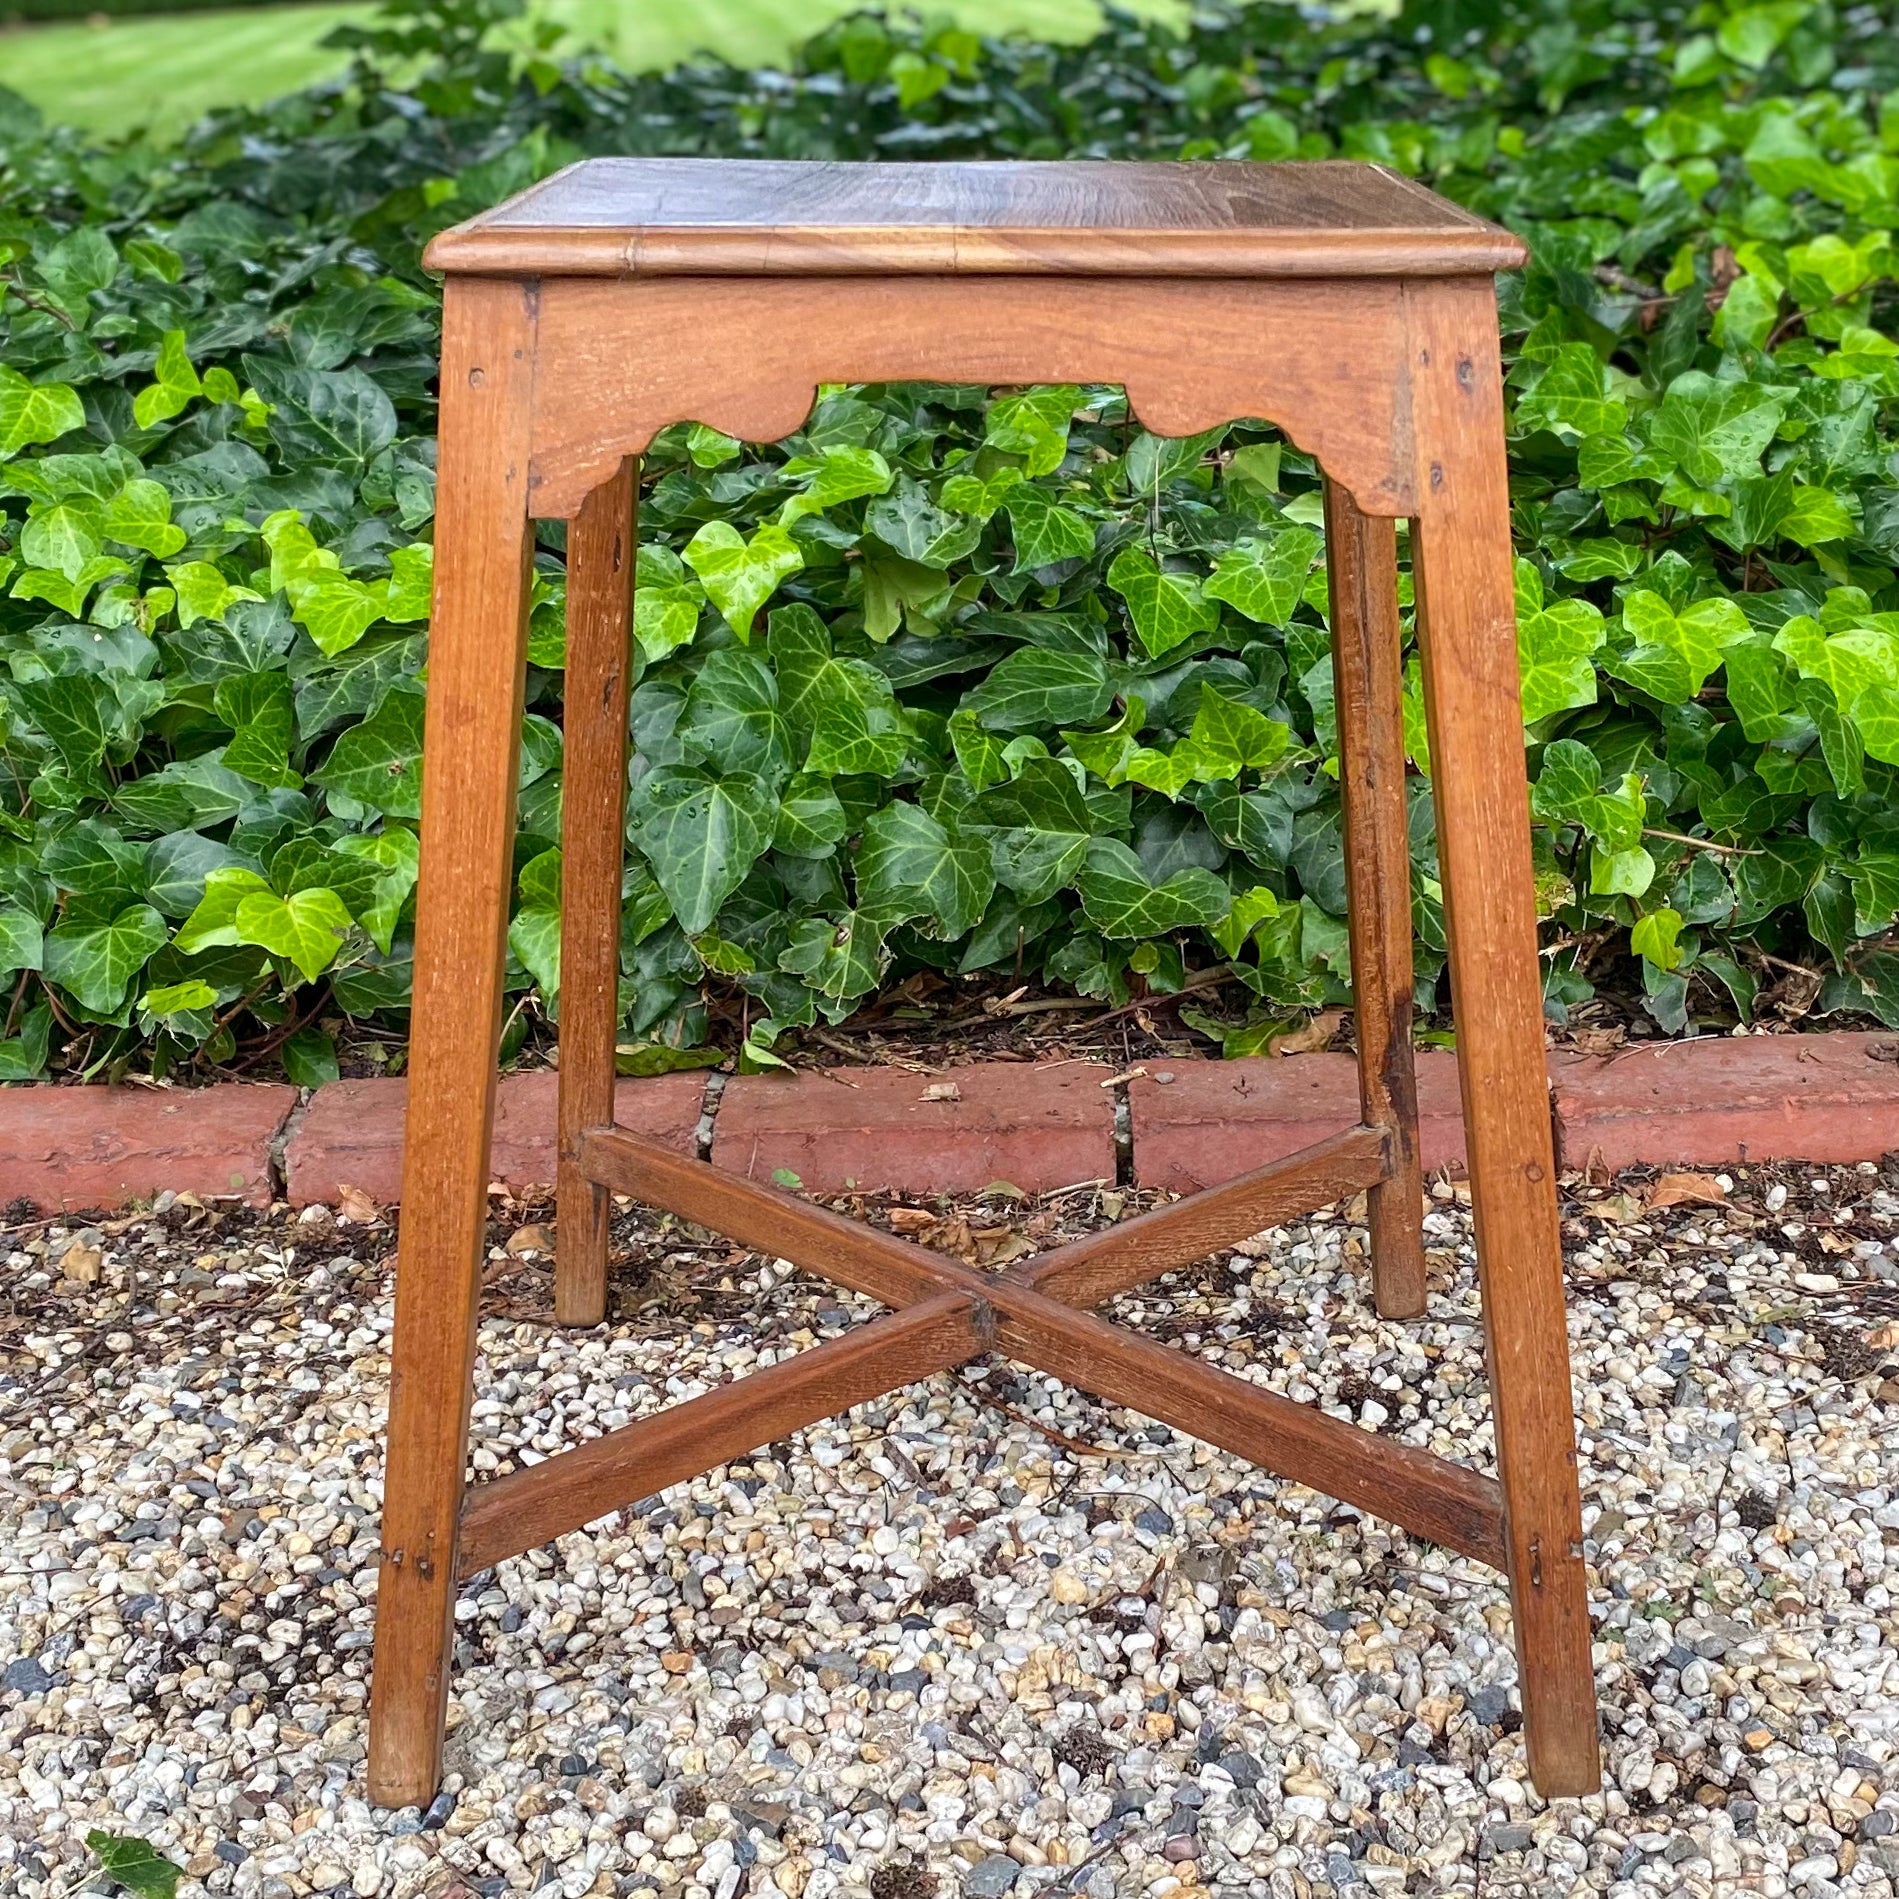 Natural Wood Side Table